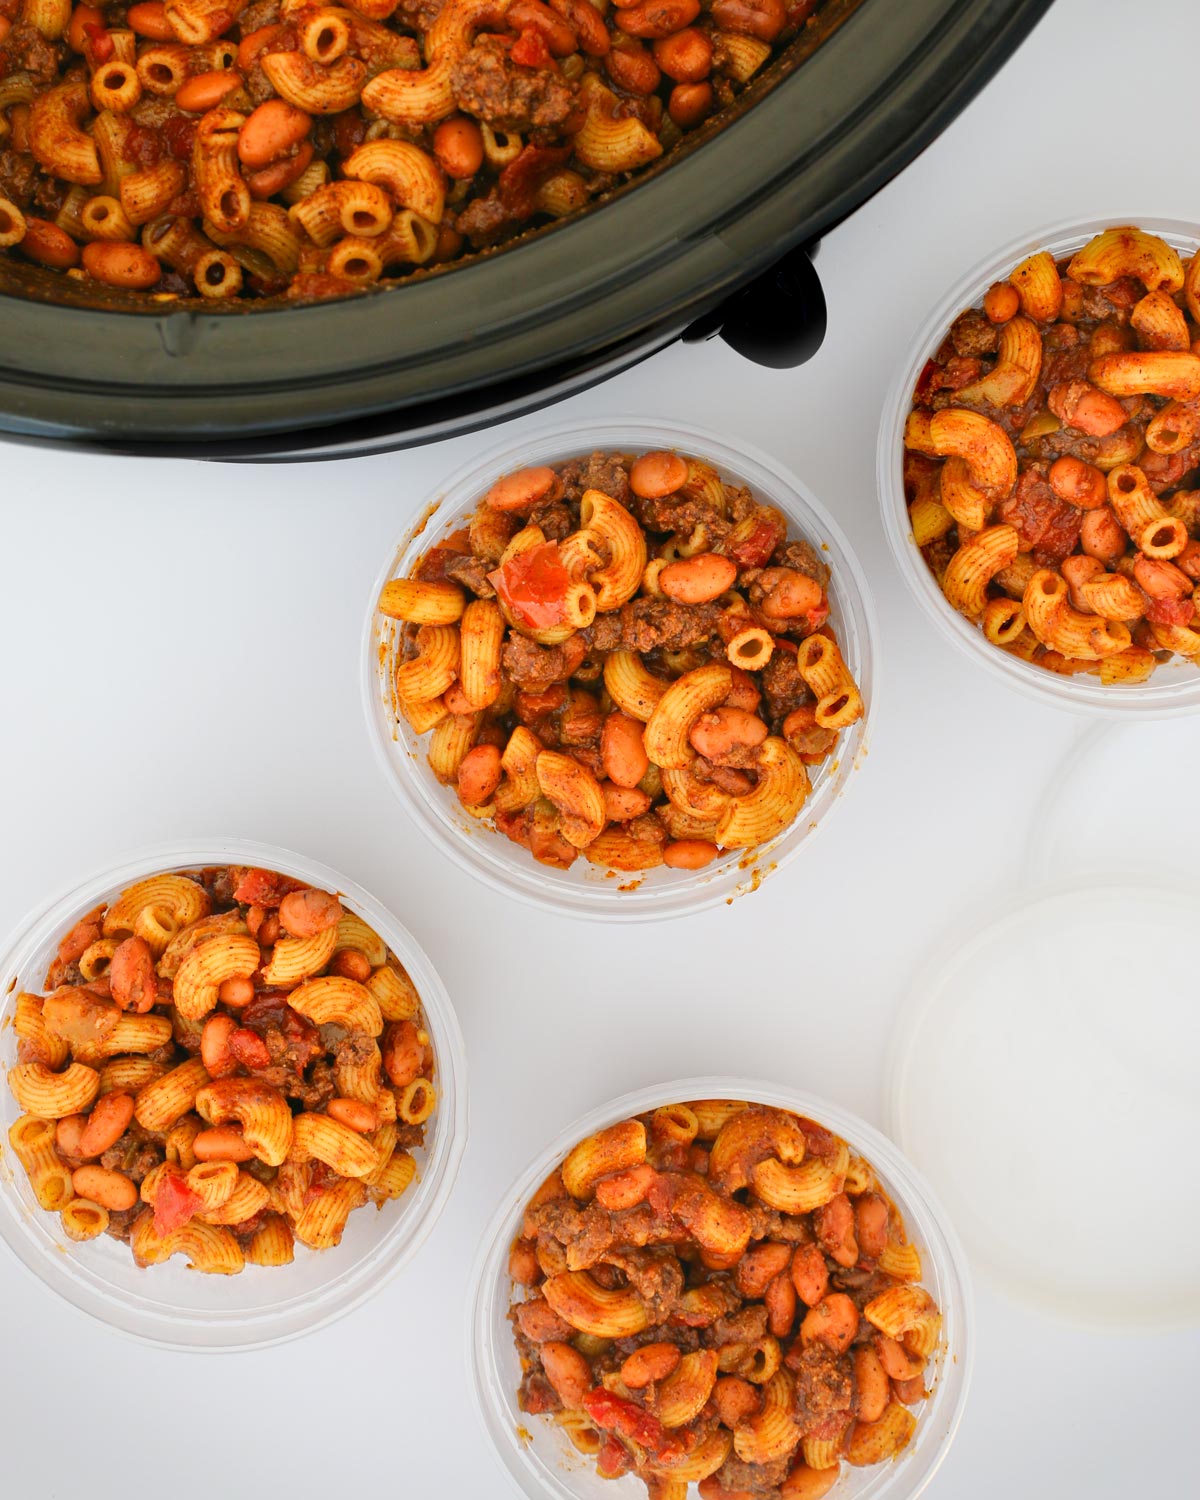 chili mac in meal prep containers next to slow cooker.